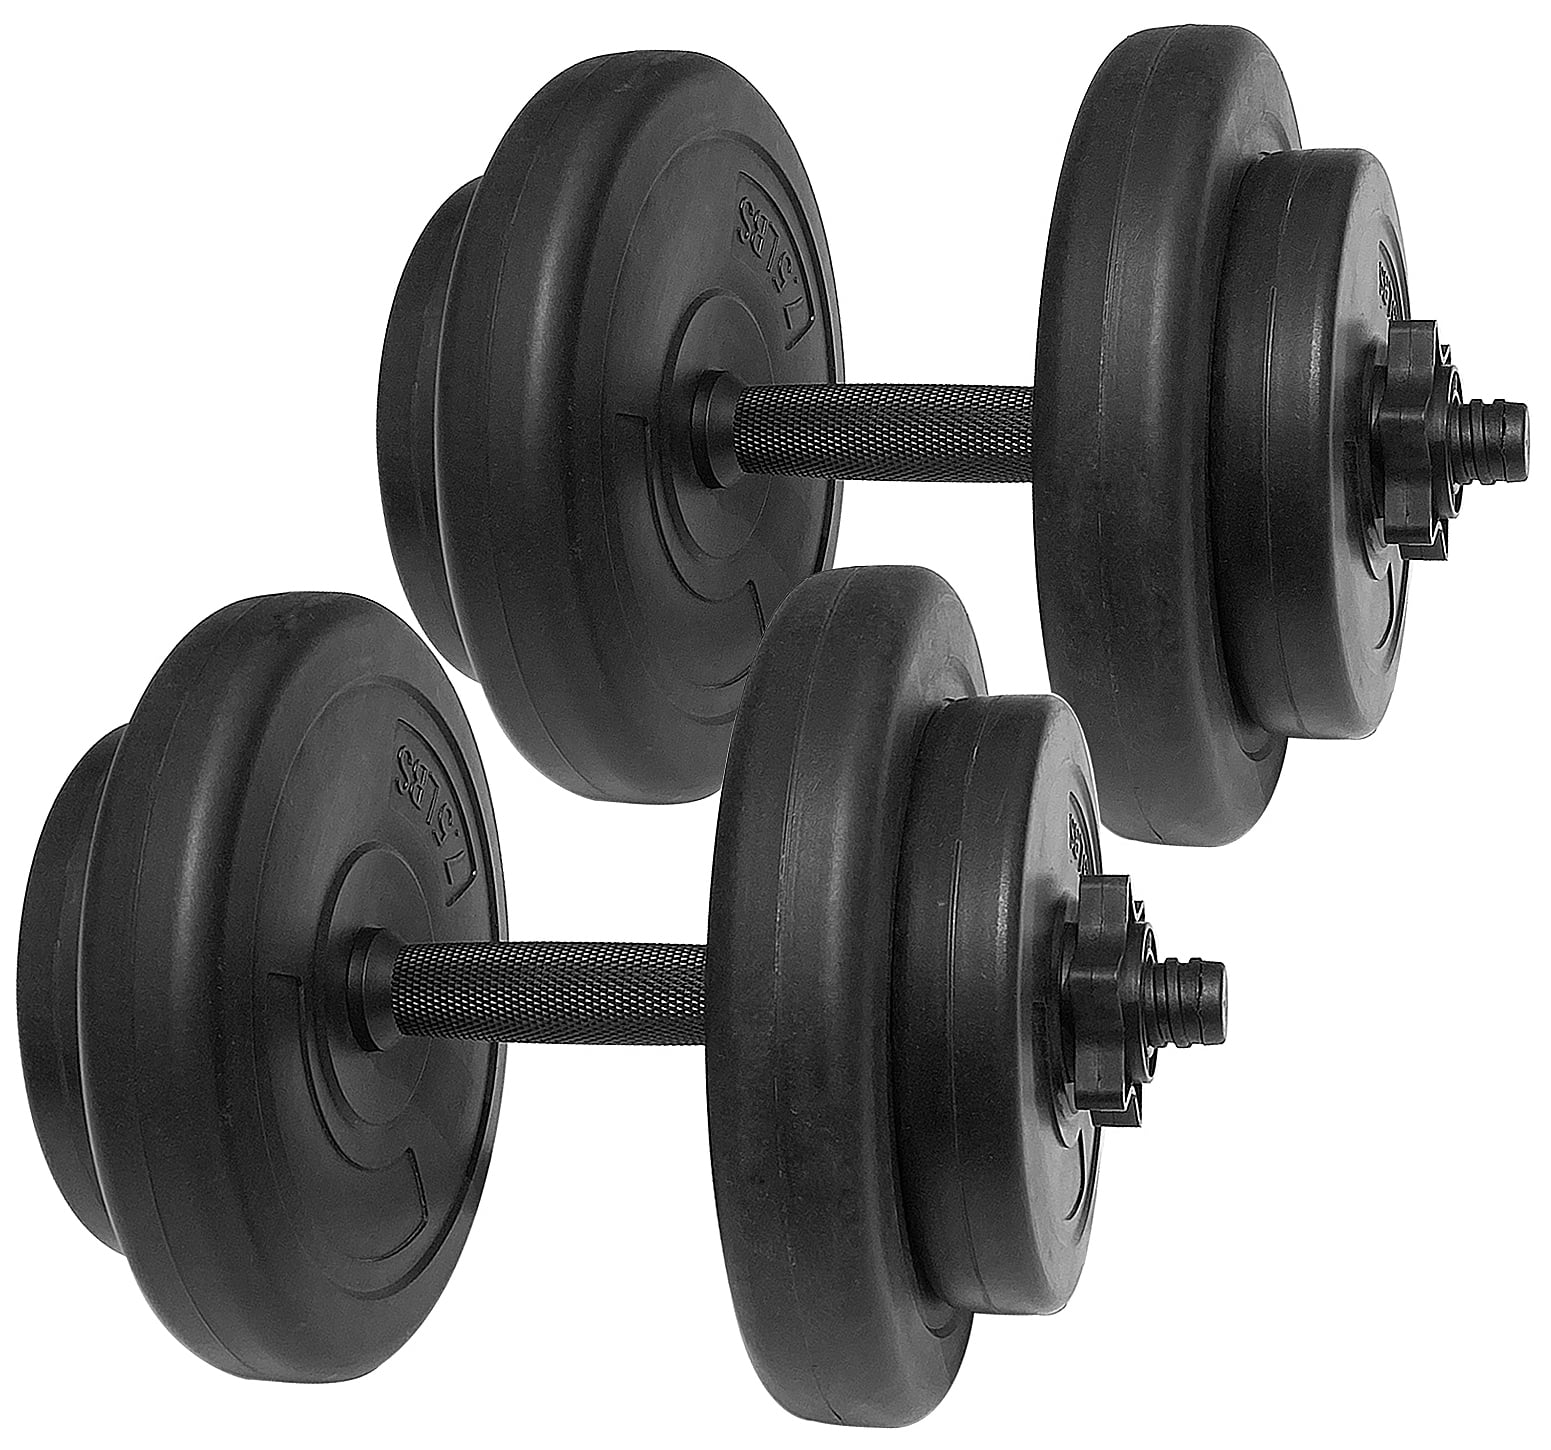 Home Adjustable Dumbbell Barbell Weight Pair,20lbs/30lbs/44lbs/66 Lbs/88/110lbs Dumbell All-Purpose Free Weights Halteres Ajustables 3-in-1 Set Gym Euipment Adjustable Weights Dumbbells Set 